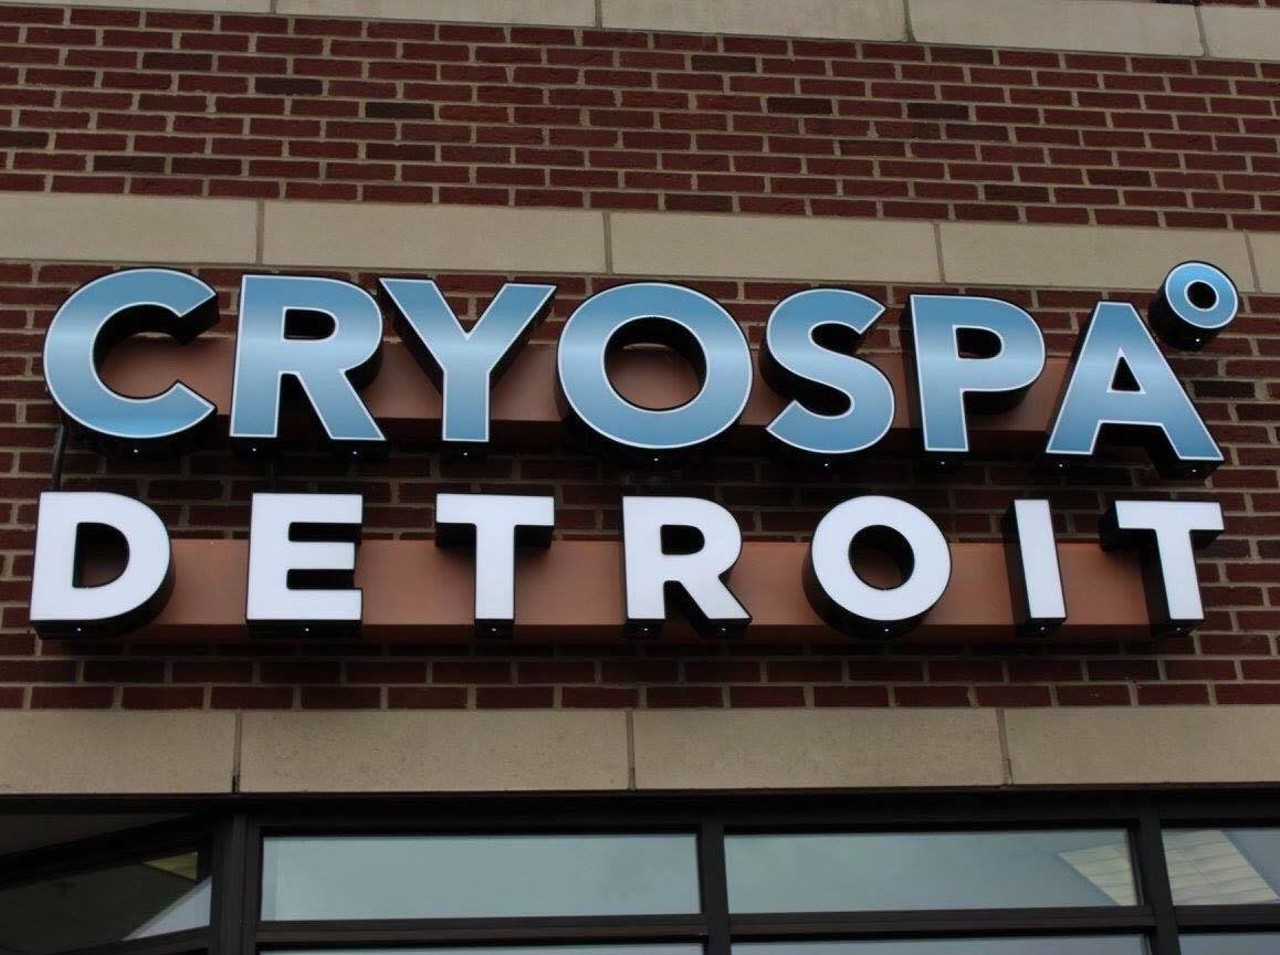 CryoSpa Detroit
32828 Woodward Ave., Royal Oak; 248-591-4418; cryospadetroit.com
If you are searching to brace some more chilling temperatures, cryotherapy may be for you. CryoSpa Detroit offers cryotherapy, where you are subjected to temperatures of -238&deg; to -274&deg;  Fahrenheit for up to three minutes. This exposure gives anti-inflammatory properties along with a multitude of other health benefits. 
Photo via Facebook / CryoSpa Detroit